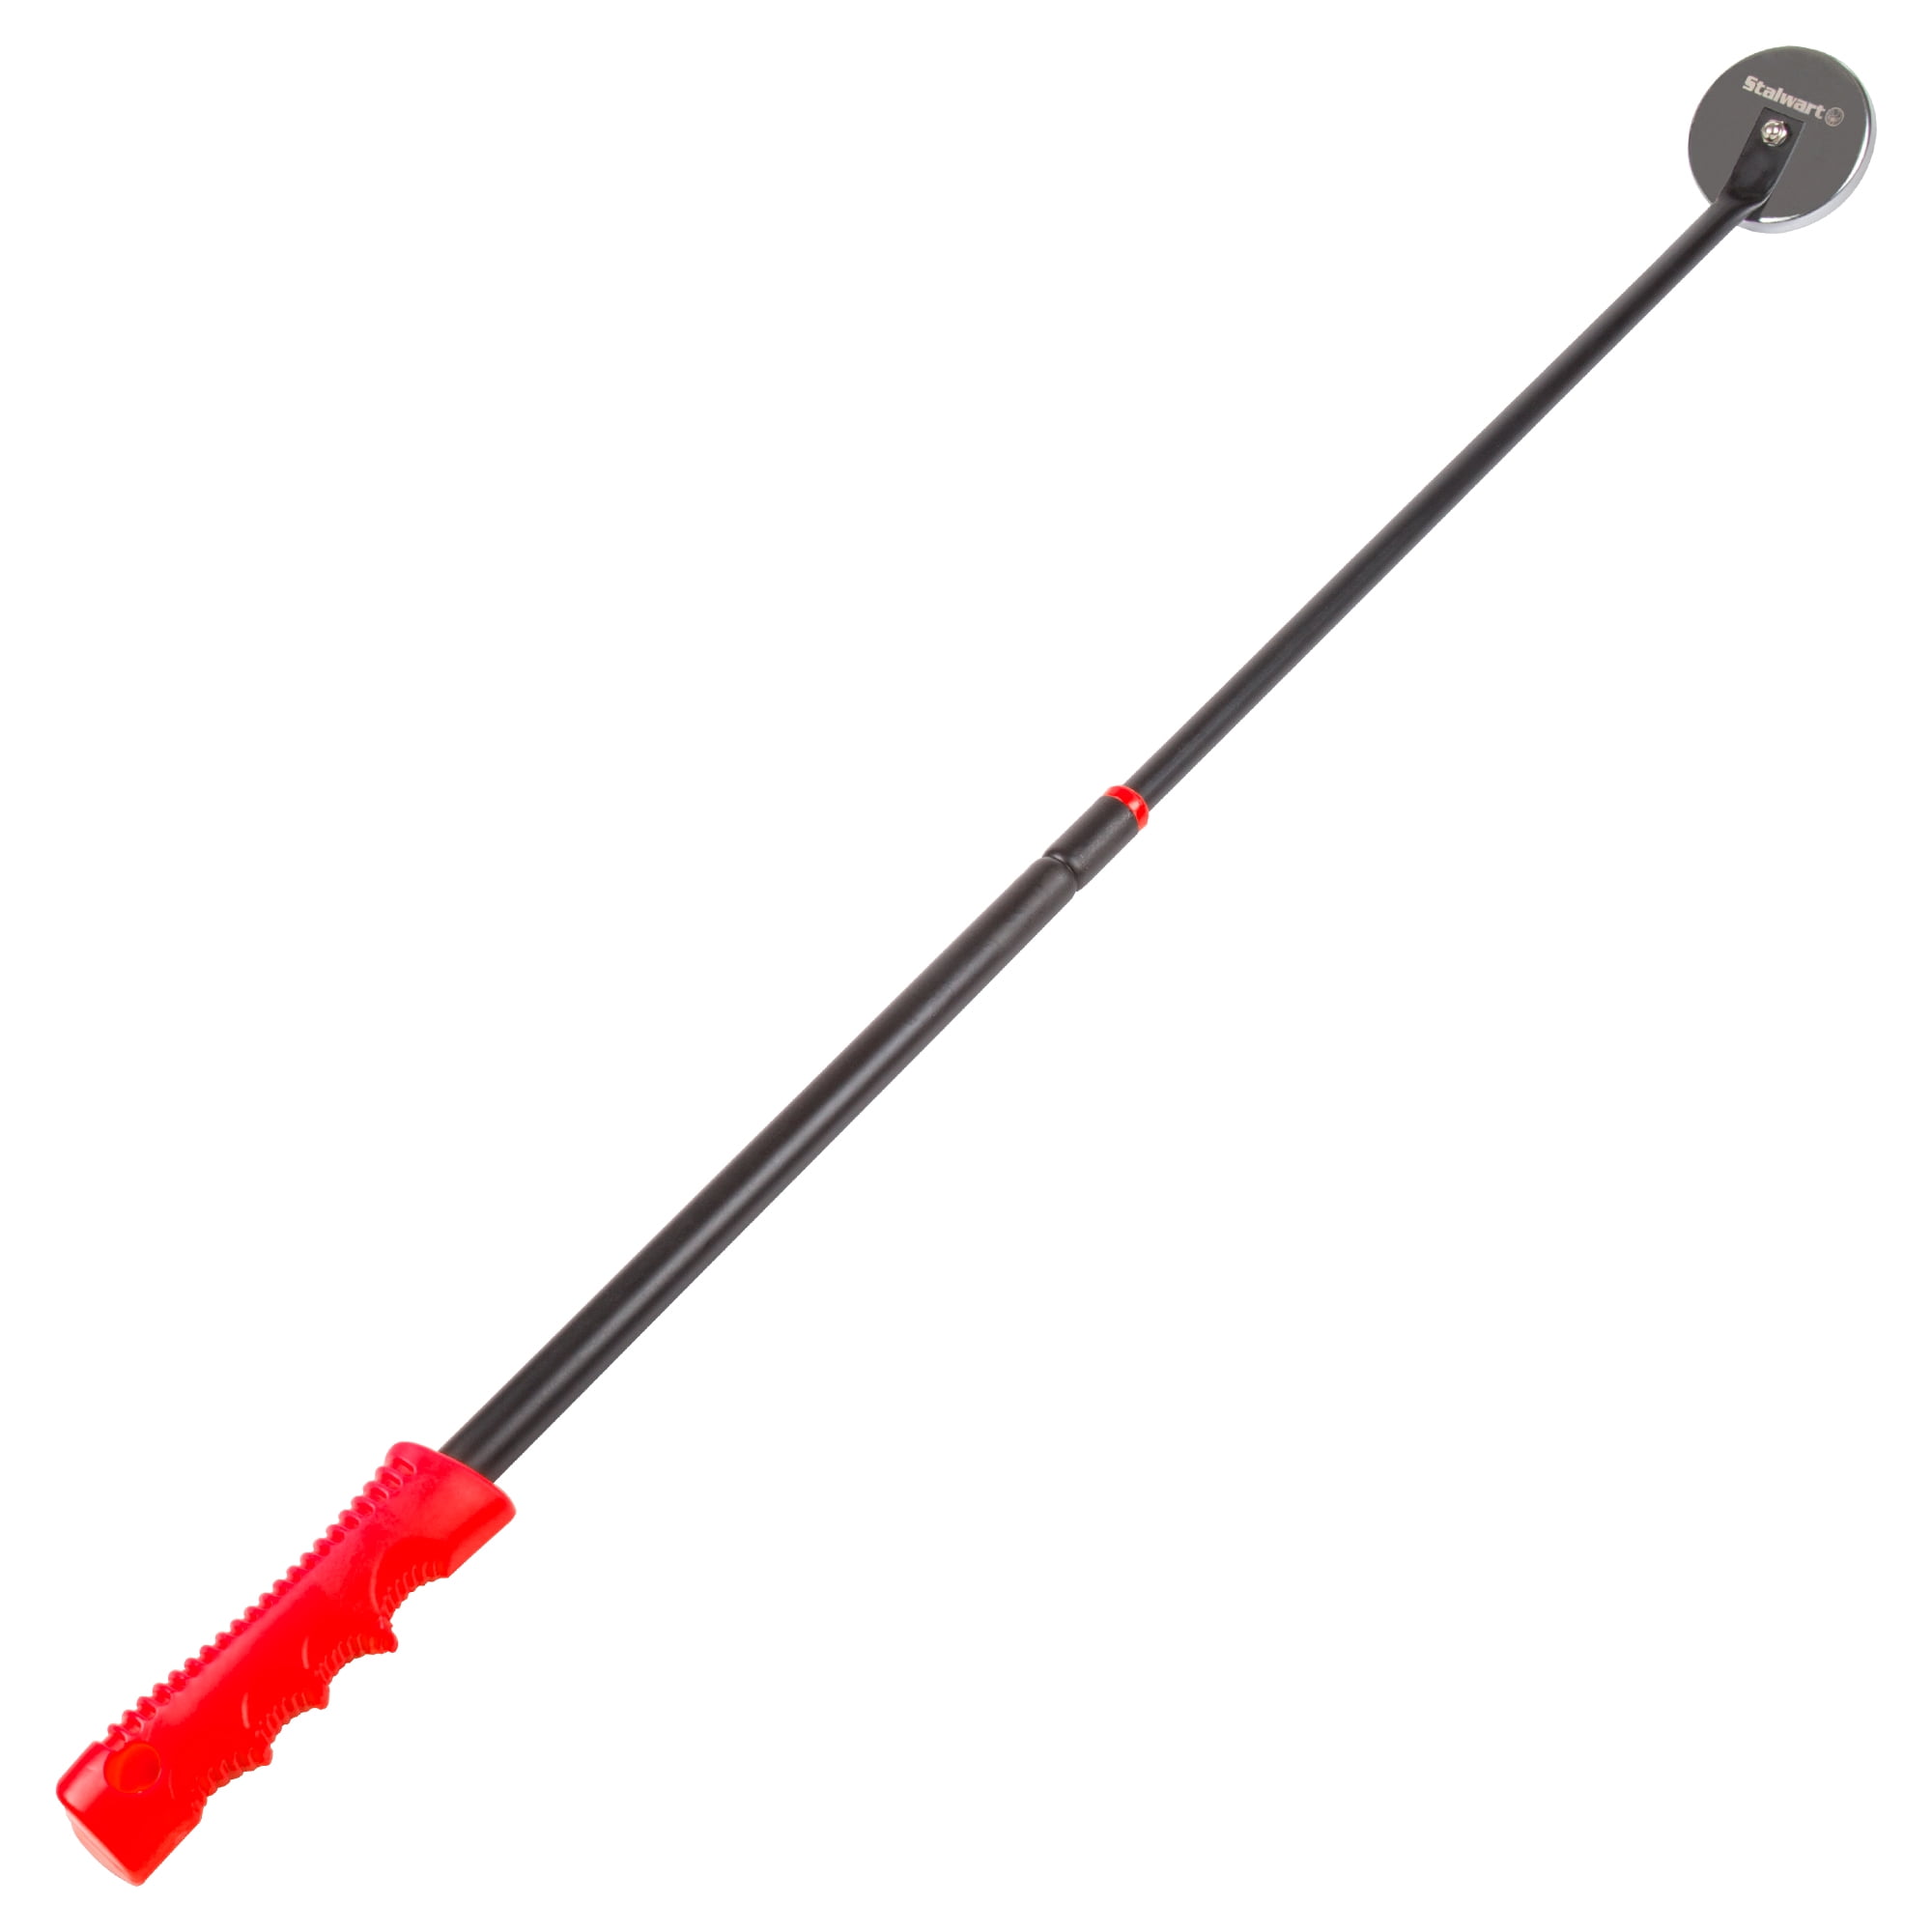 Magnet to Pickup Nails, Screws, and Metal Scraps Pull Capacity Orange 40 Inch by Stalwart Magnetic Pick Up Tool With 50 Lb